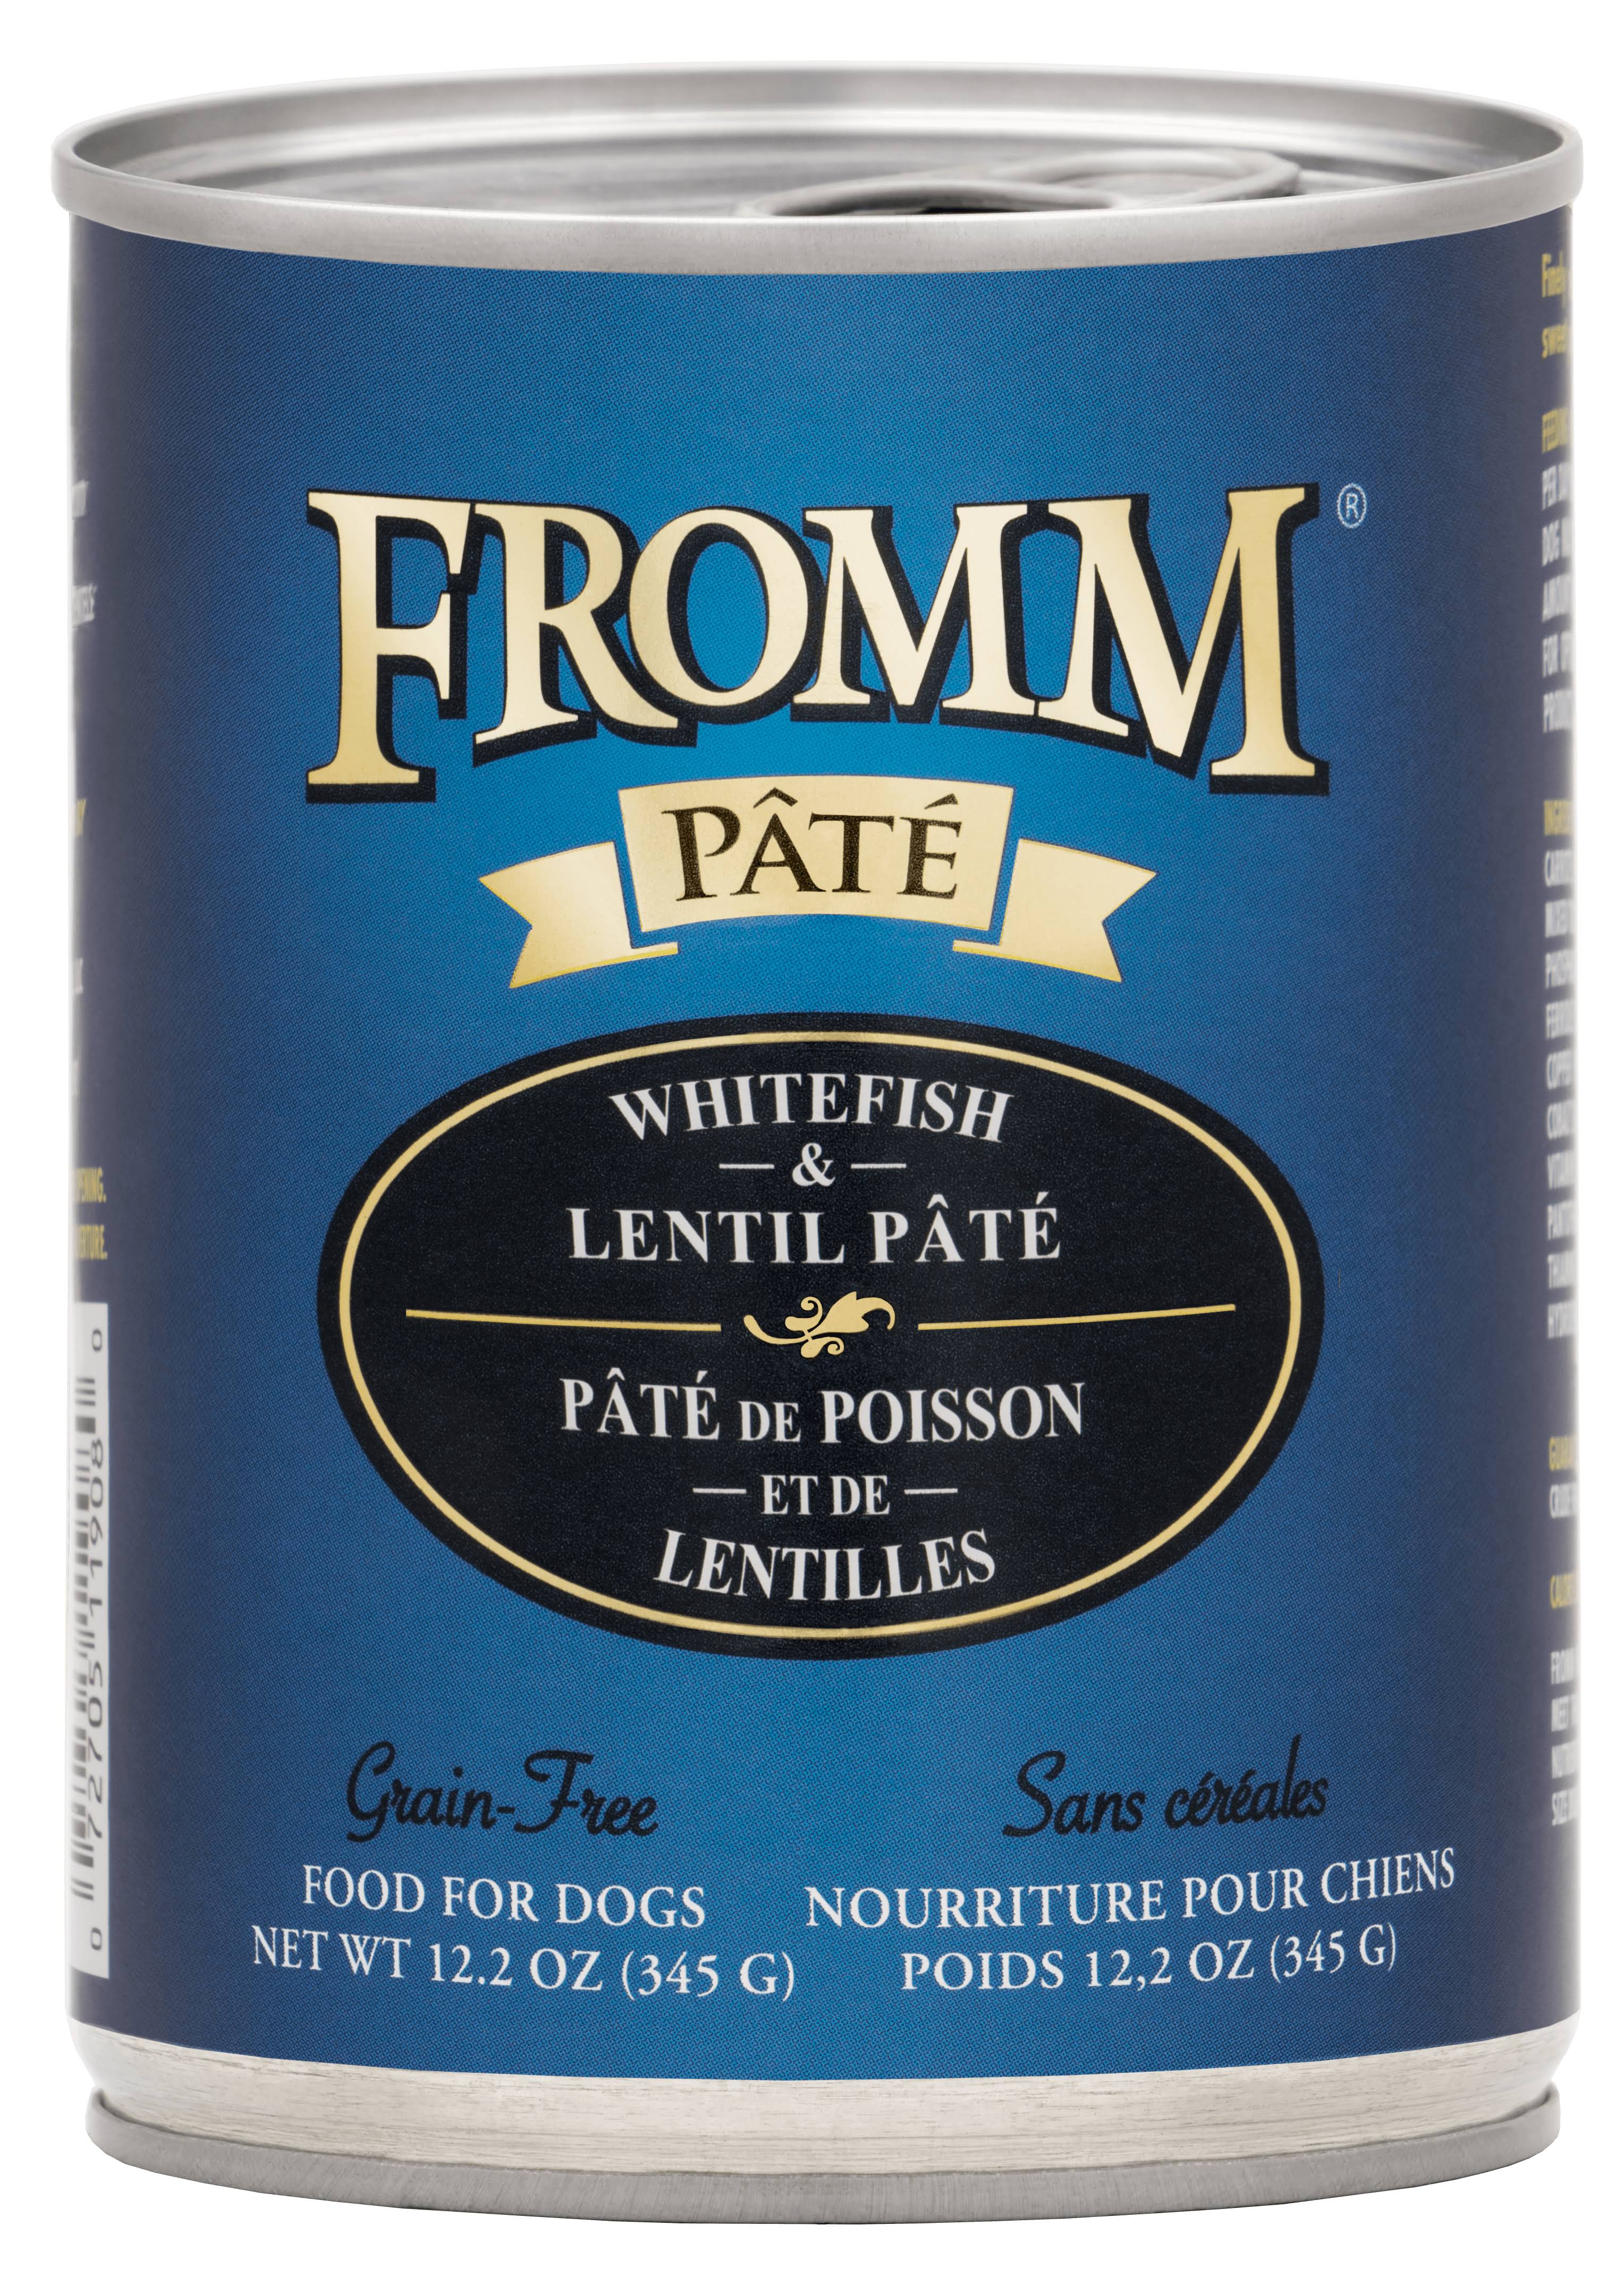 Fromm Grain Free Whitefish & Lentil Pate Canned Dog Food - 12.2-oz, Case of 12